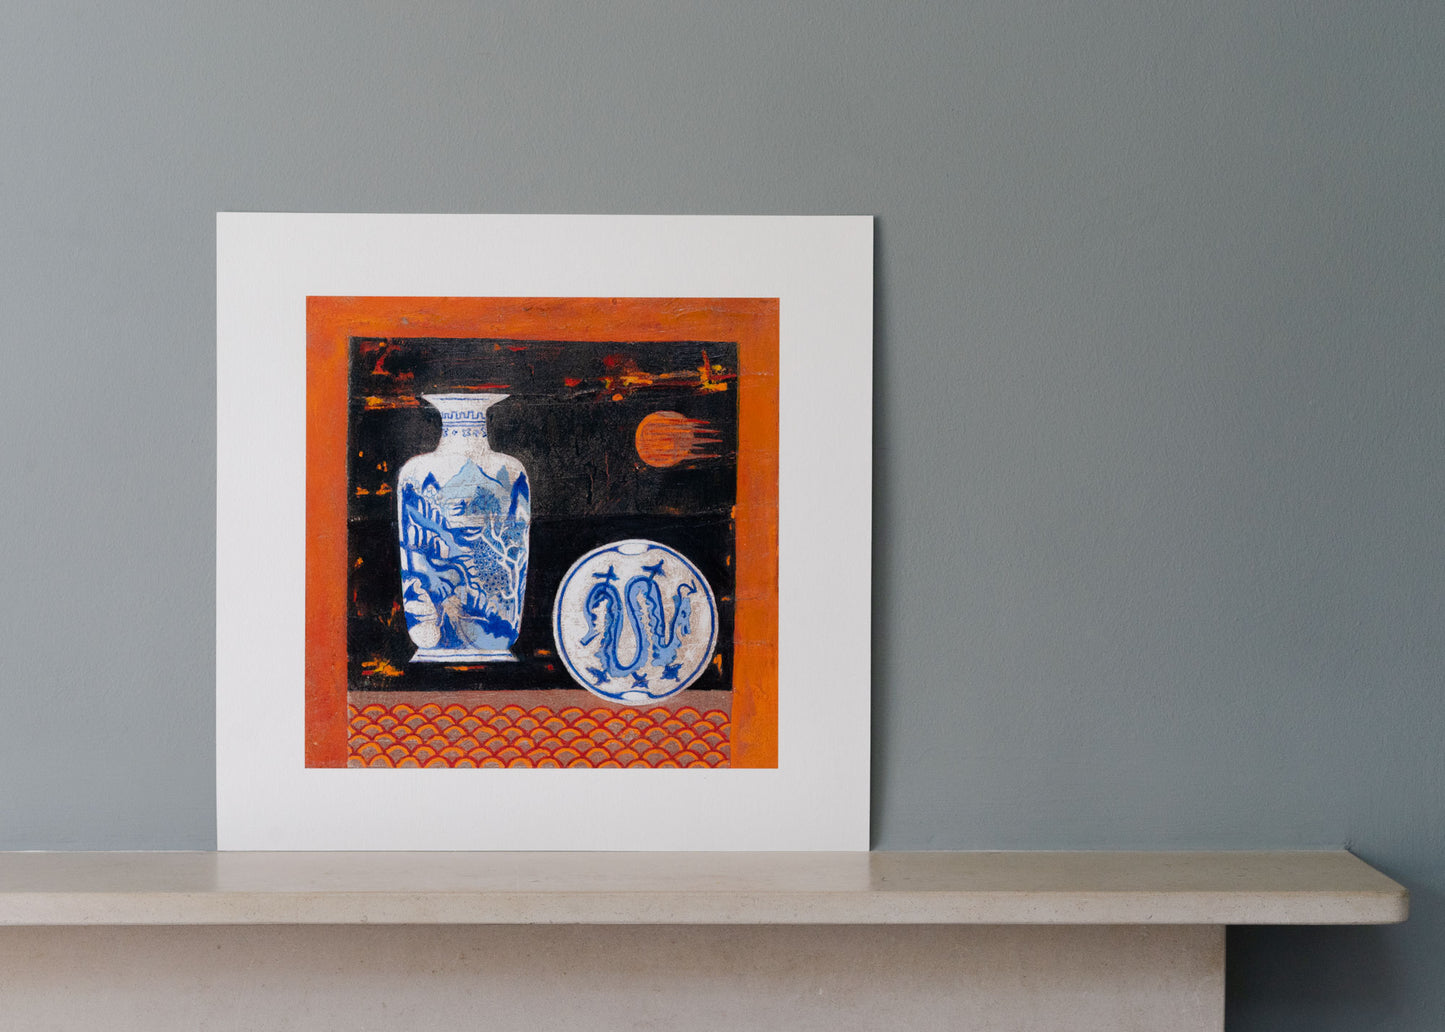 Chinese Landscape and Dragon, Limited Edition Giclée Prints